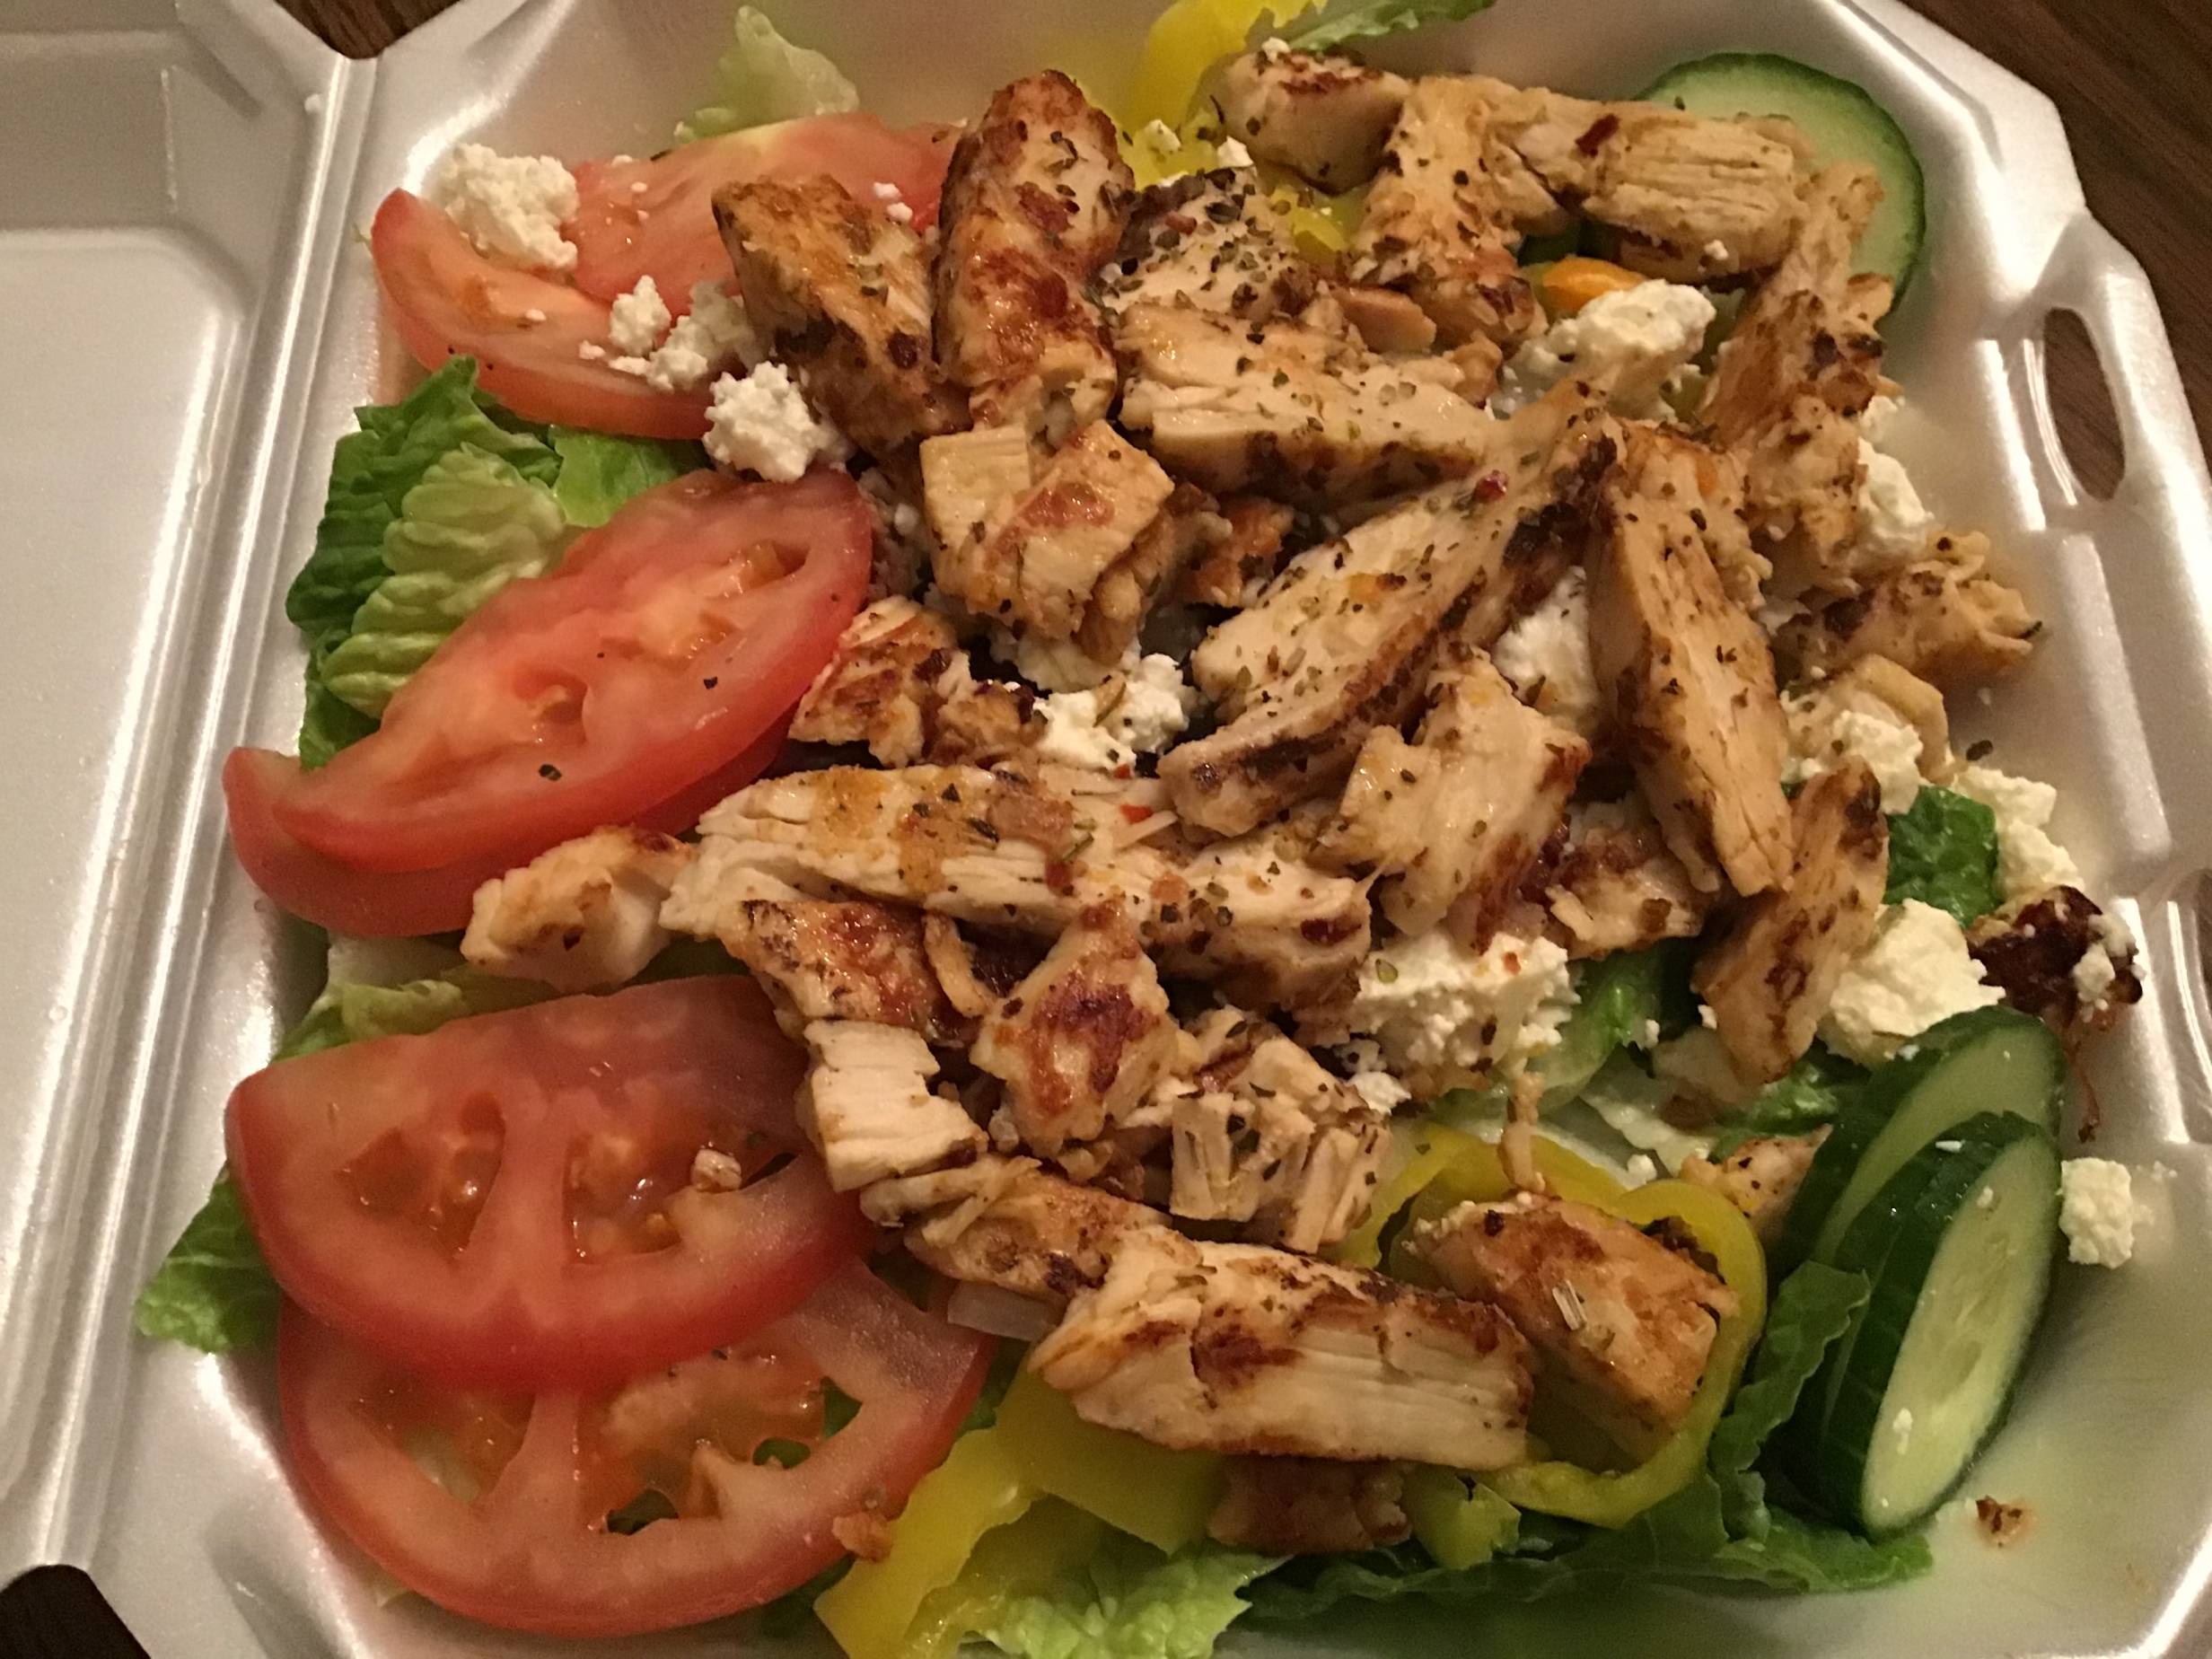 Greek Salad with chicken at Niro's Gyros. A large salad is served in a white styrofoam containter. Romaine lettuce, sliced tomato, sliced cucumber, banana peppers, feta cheese, and grilled chicken are visible. Photo by Rachael McMillan. 